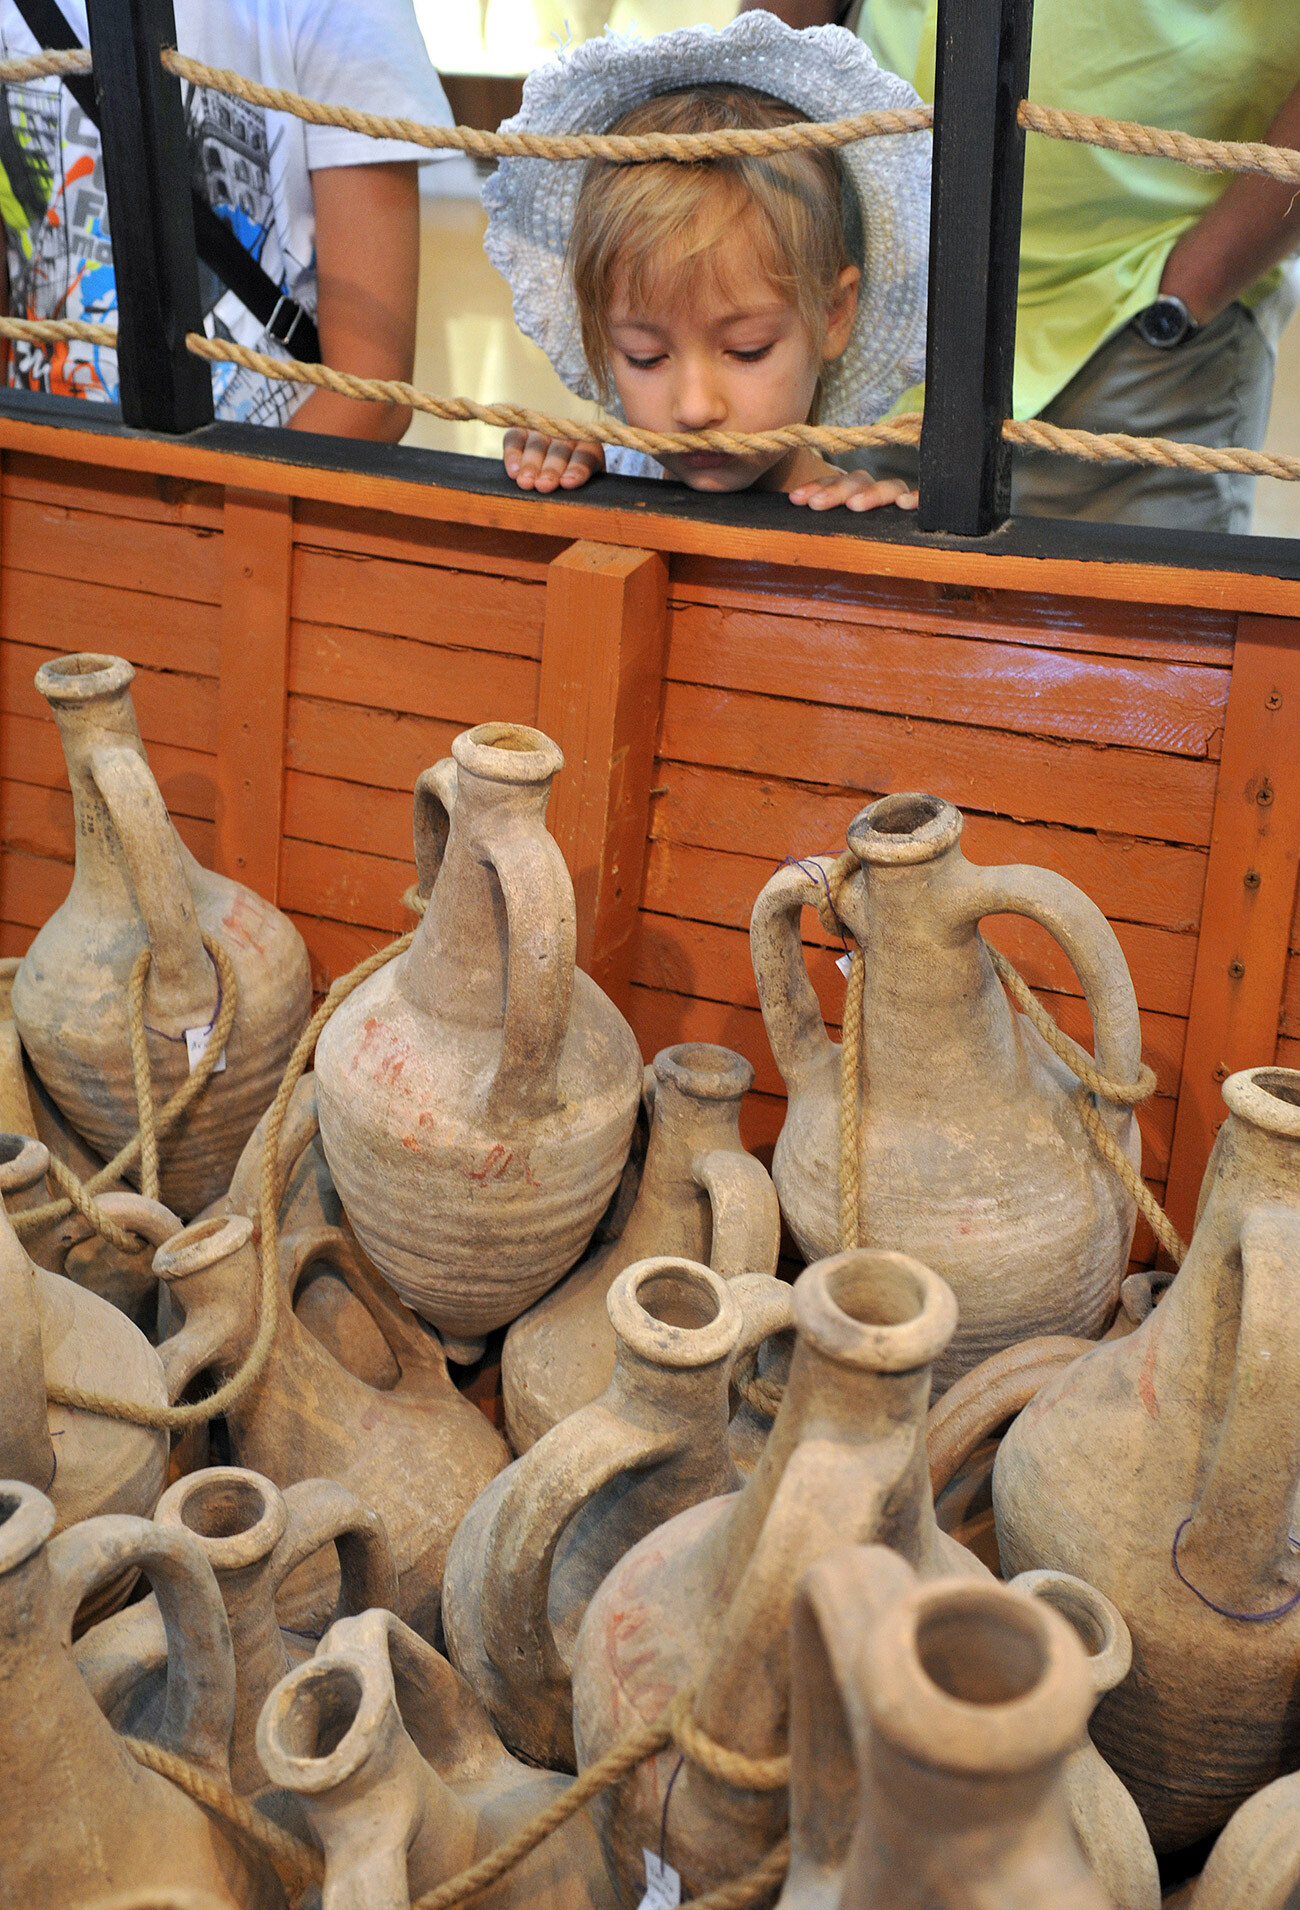 The ‘Tanais’ museum has a lot of clay amphorae found during excavations